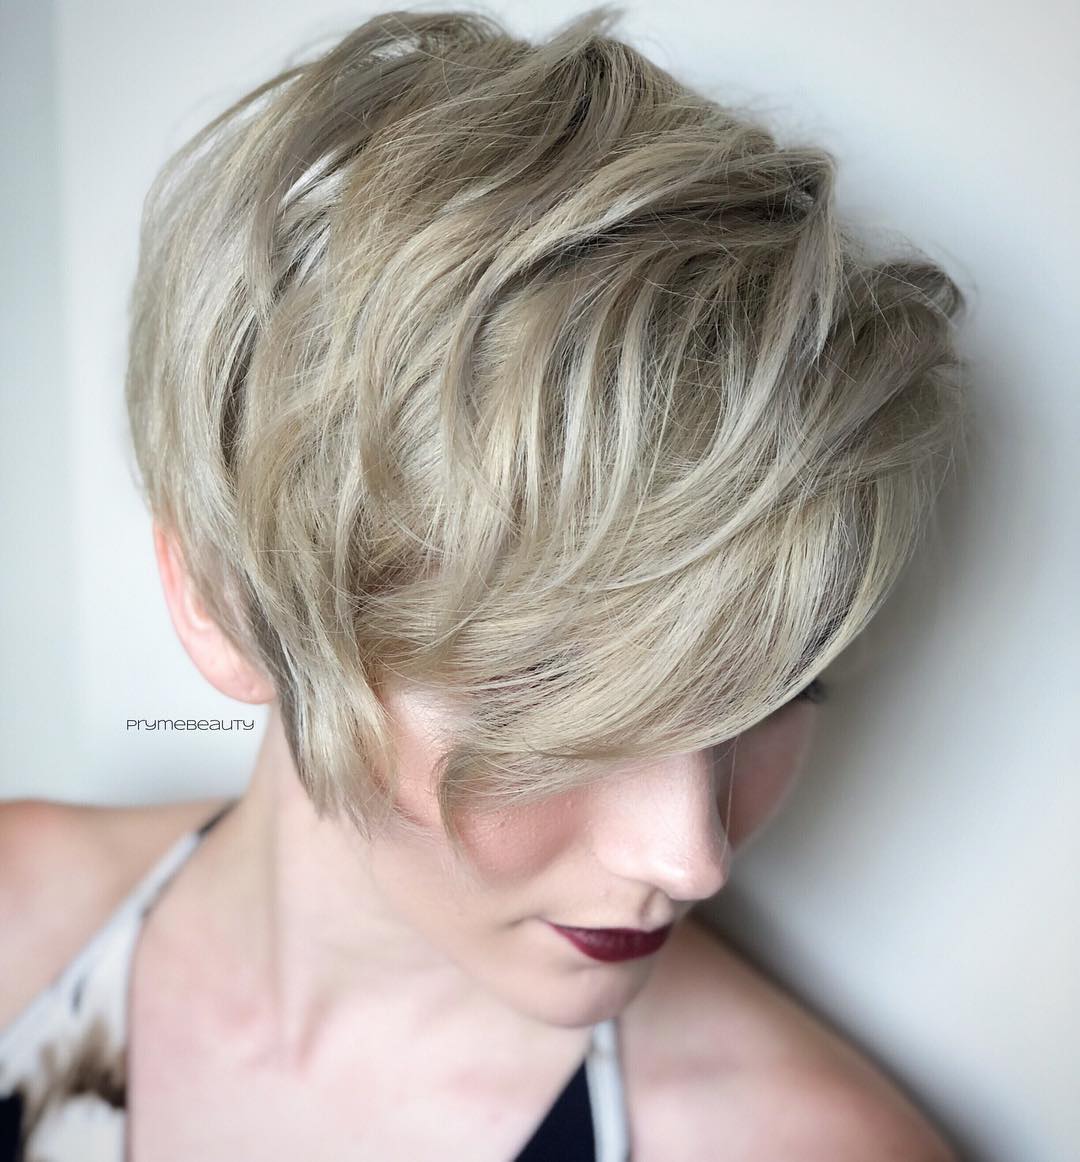 Top 10 Trendy Low Maintenance Short Layered Hairstyles Popular Haircuts